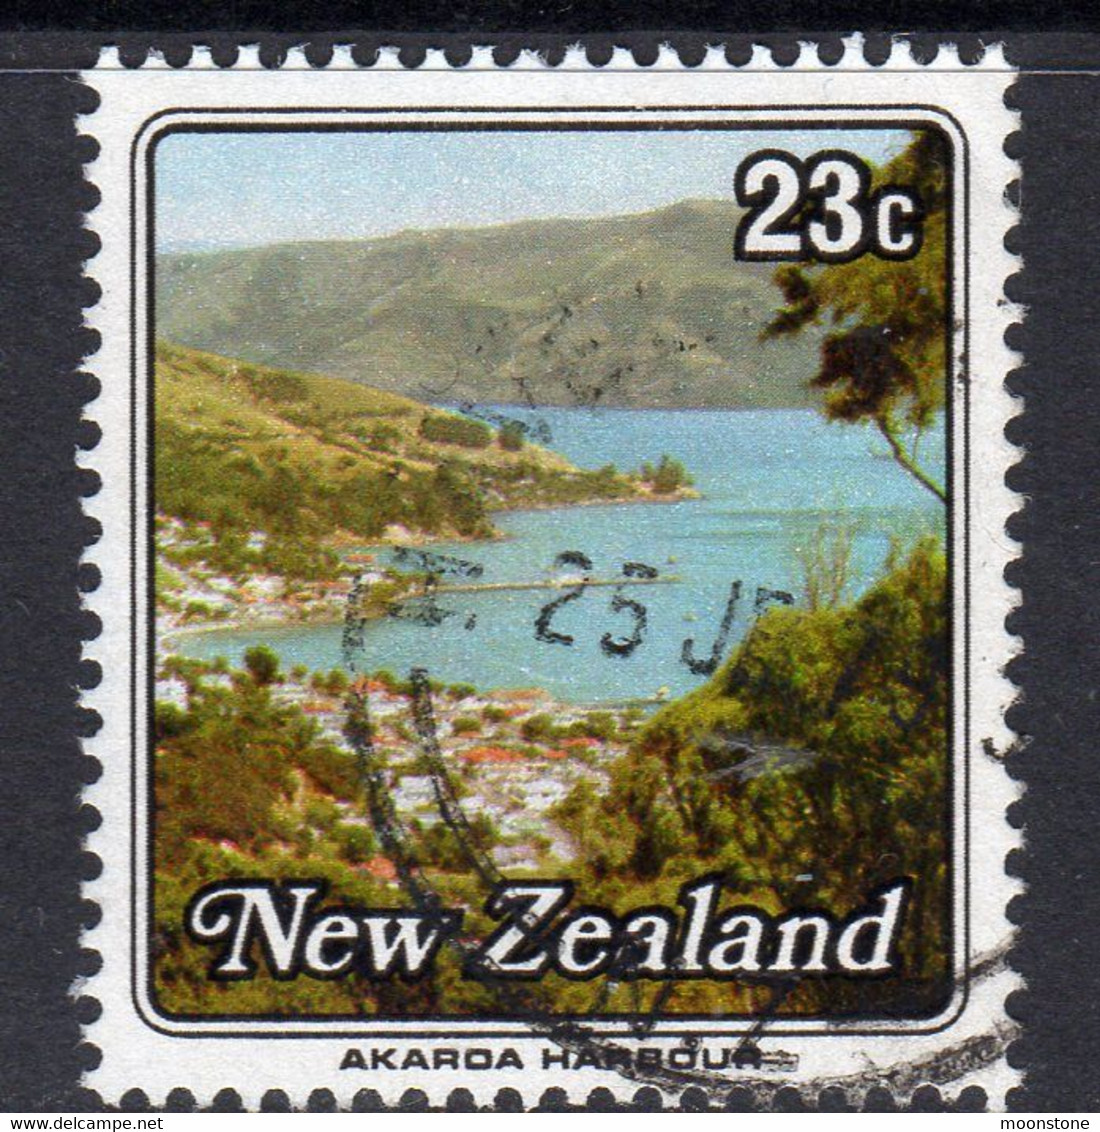 New Zealand 1979 Small Harbours 23c Value, Used, SG 1194 (A) - Usati